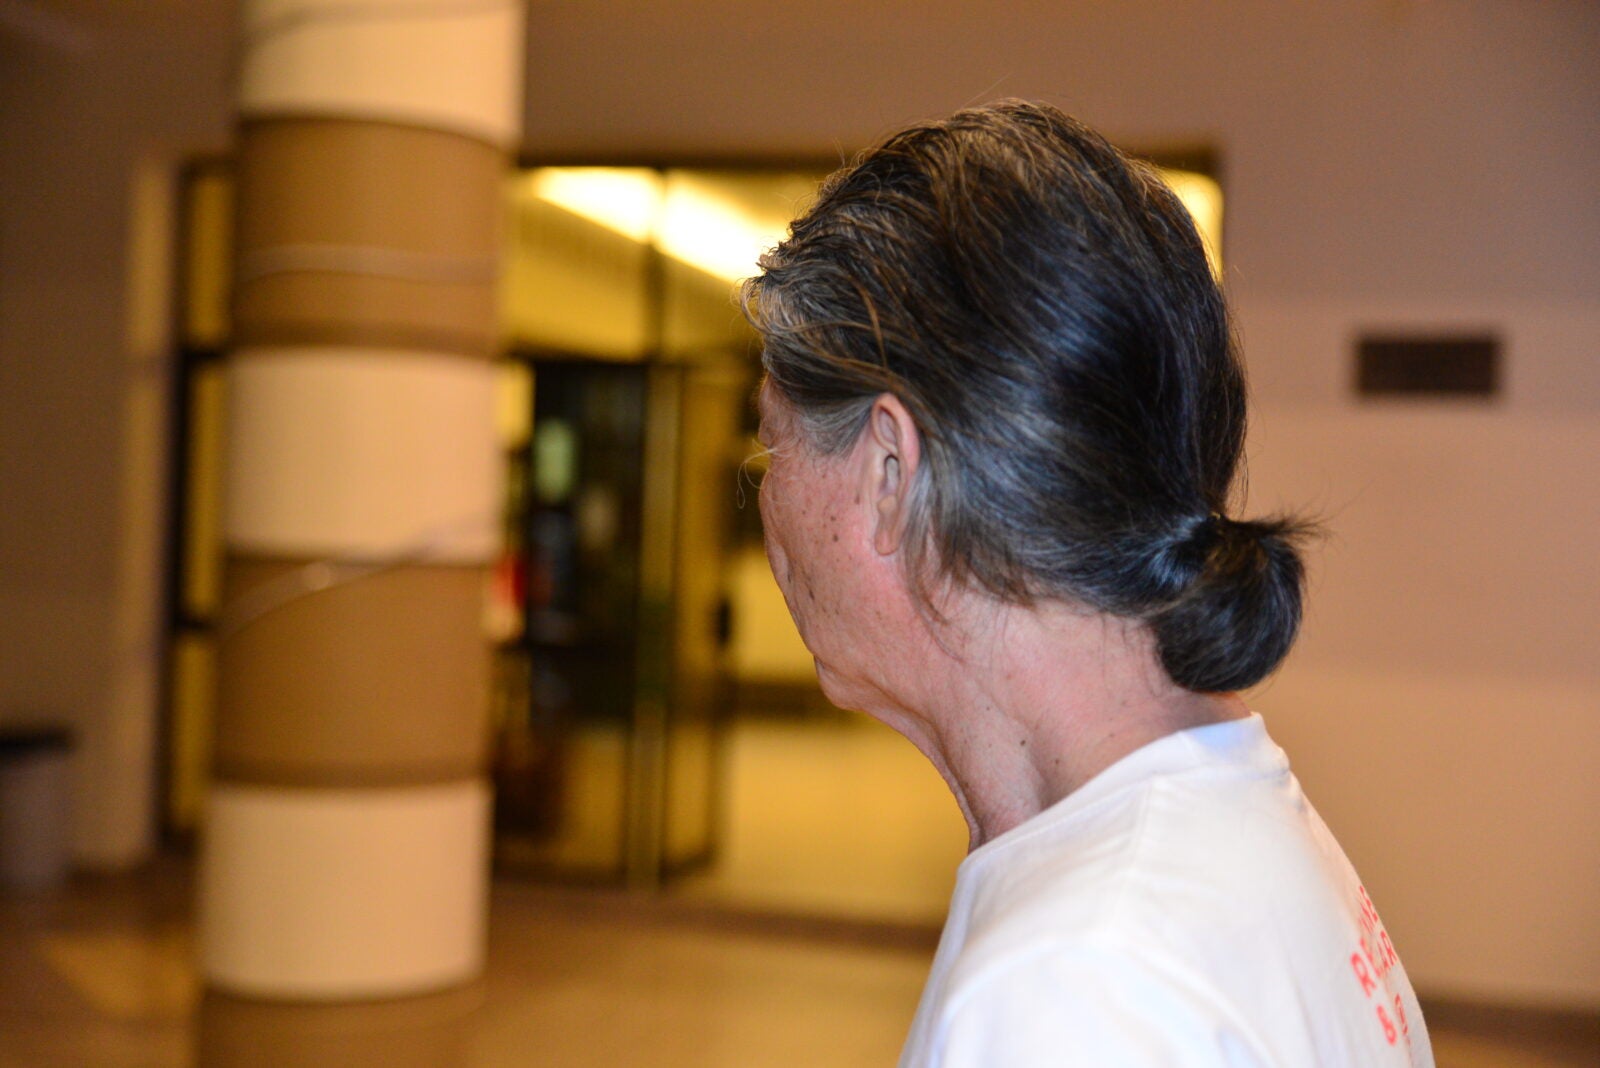 An old man with long hair tied in a bun, wearing a white t-shirt and looking away to hide his face.